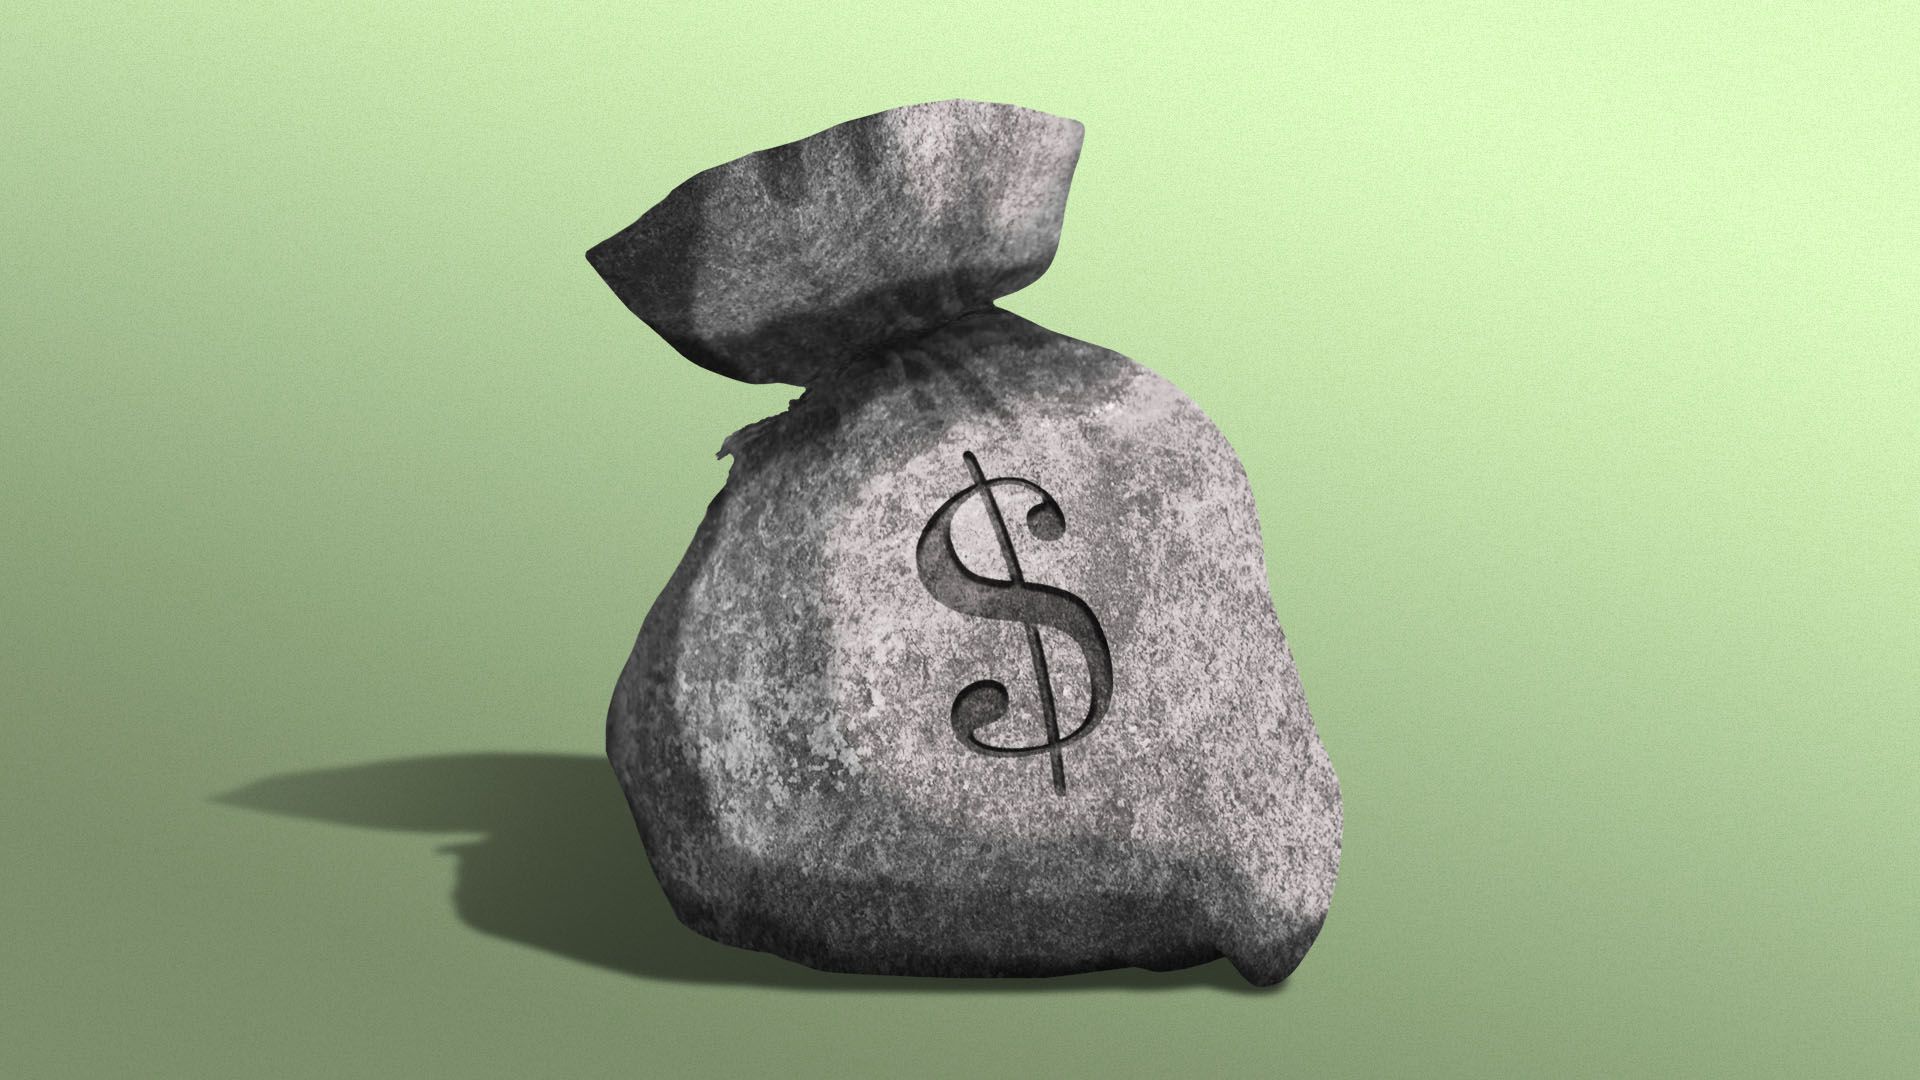 Illustration of a sack of money made out of concrete